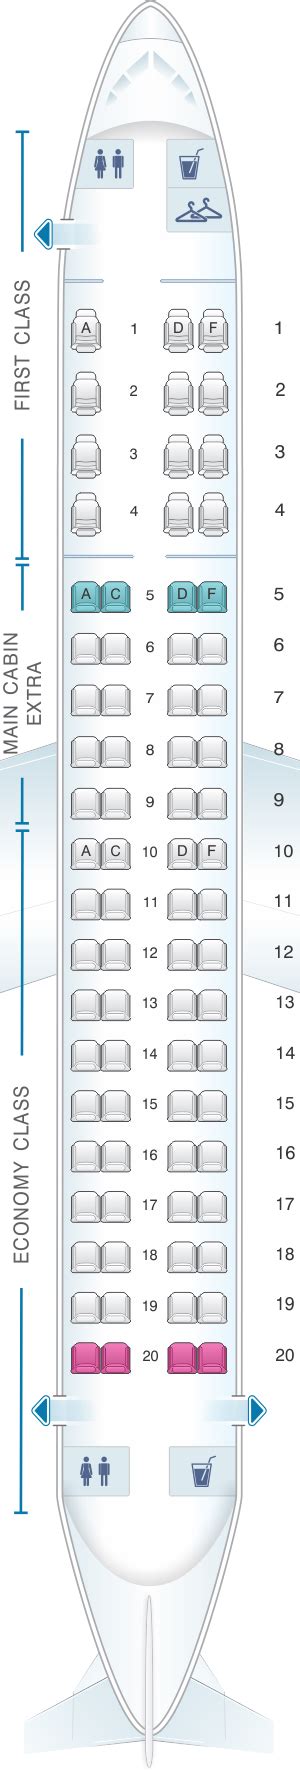 American airlines embraer 175 seat map. For your next American Airlines flight, use this seating chart to get the most comfortable seats, legroom, ... American Airlines Seat Maps. Overview; Planes & Seat Maps. Airbus A319 (319) Airbus A320 (320) ... Embraer ERJ-175 (E75) Layout 1; Embraer ERJ-175 (E75) Layout 2; Check-in; Baggage; ... 